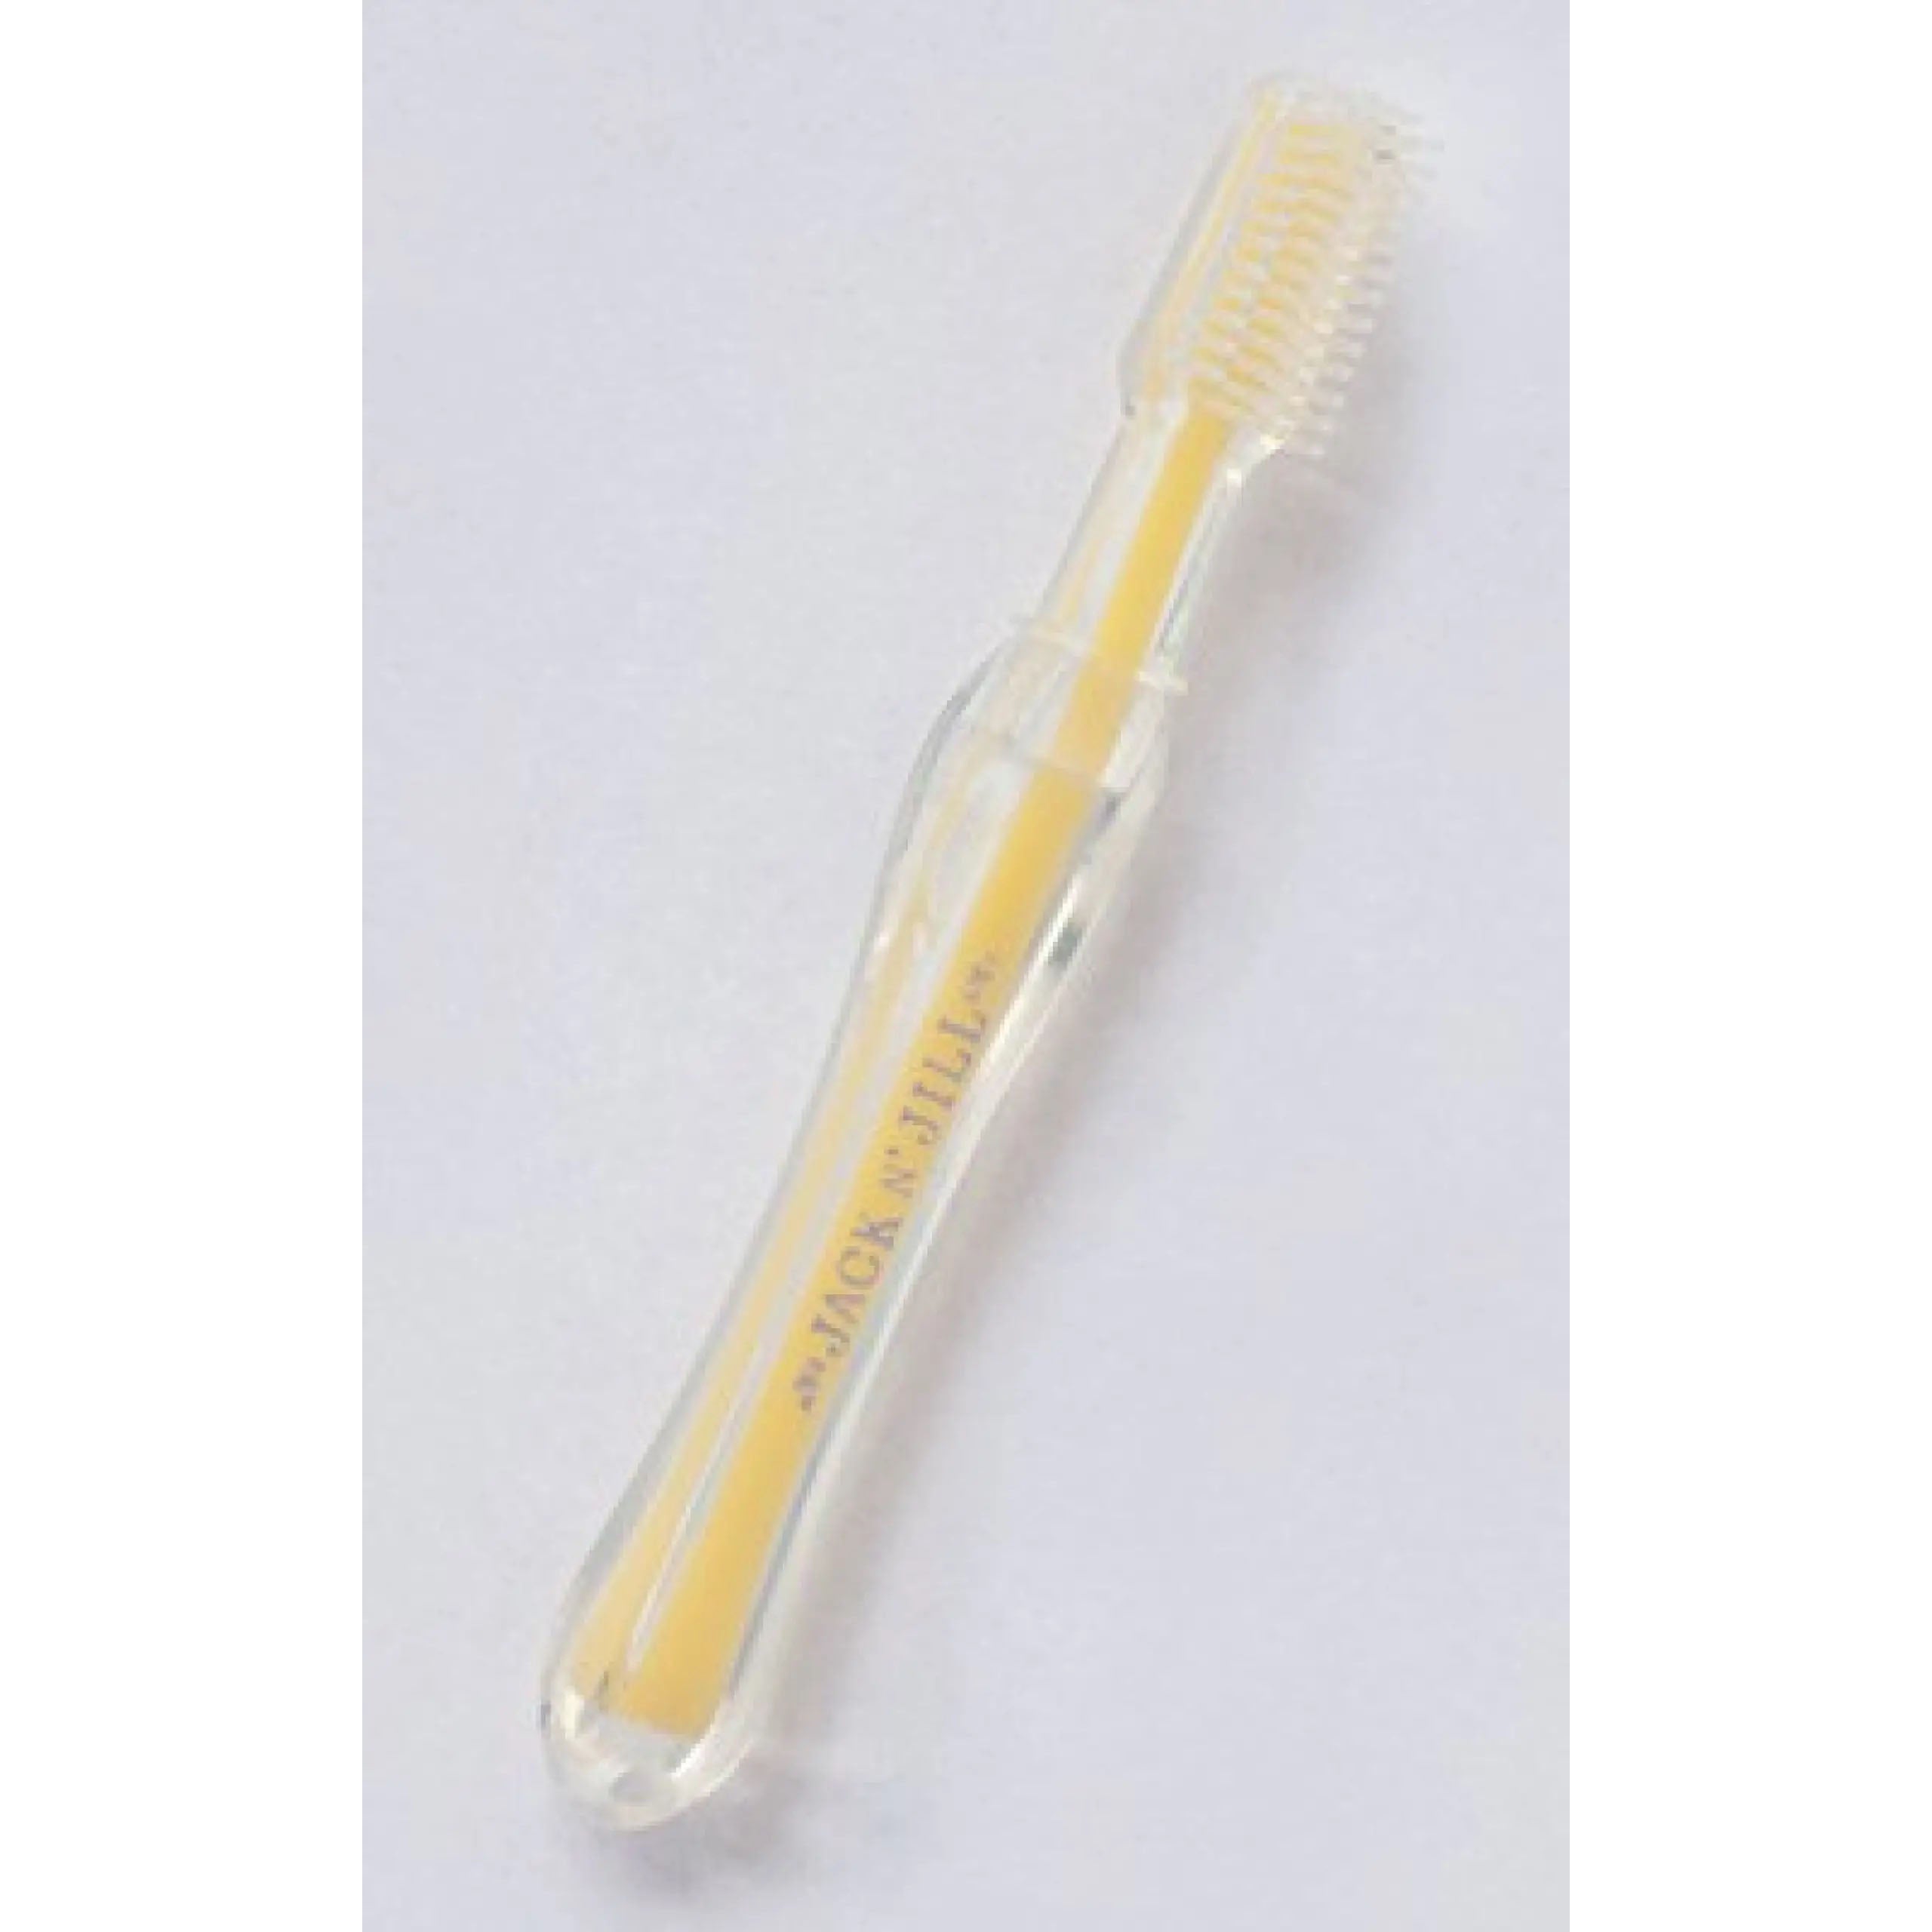 Silicone Tooth Brush - Stage 2 (1 - 2 years)